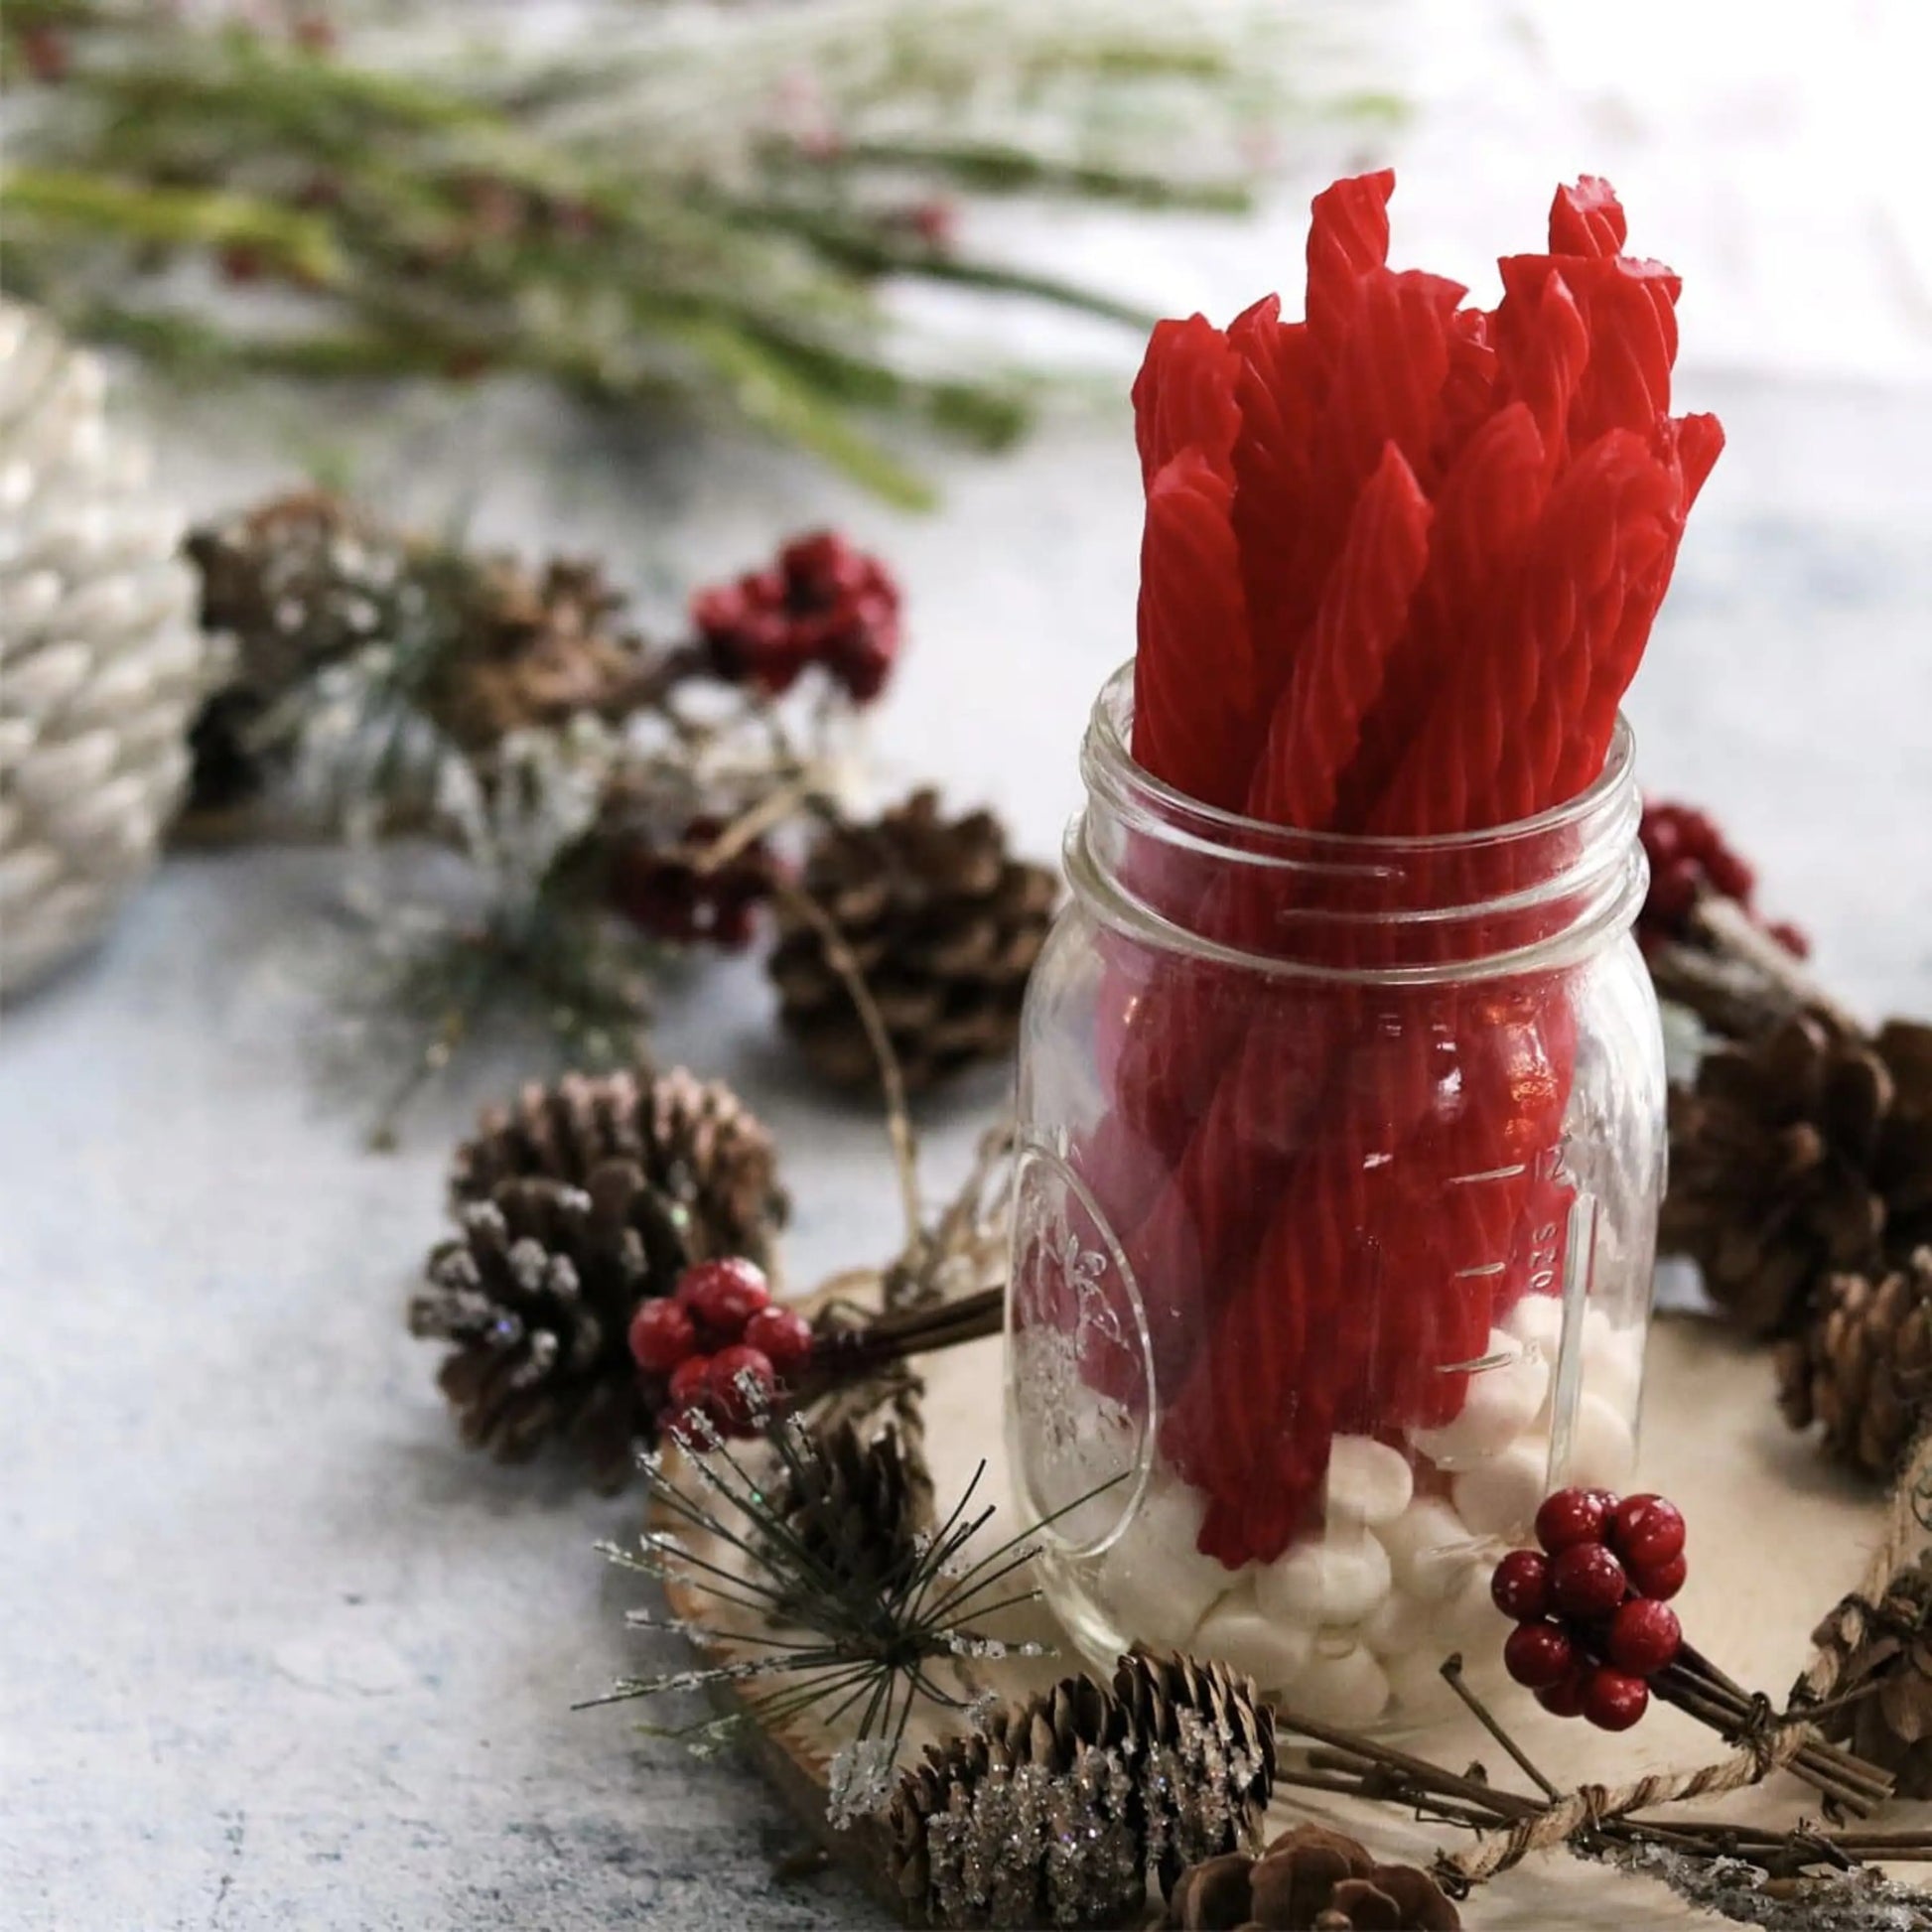 RED VINES Original Red Twists candy in festive jar